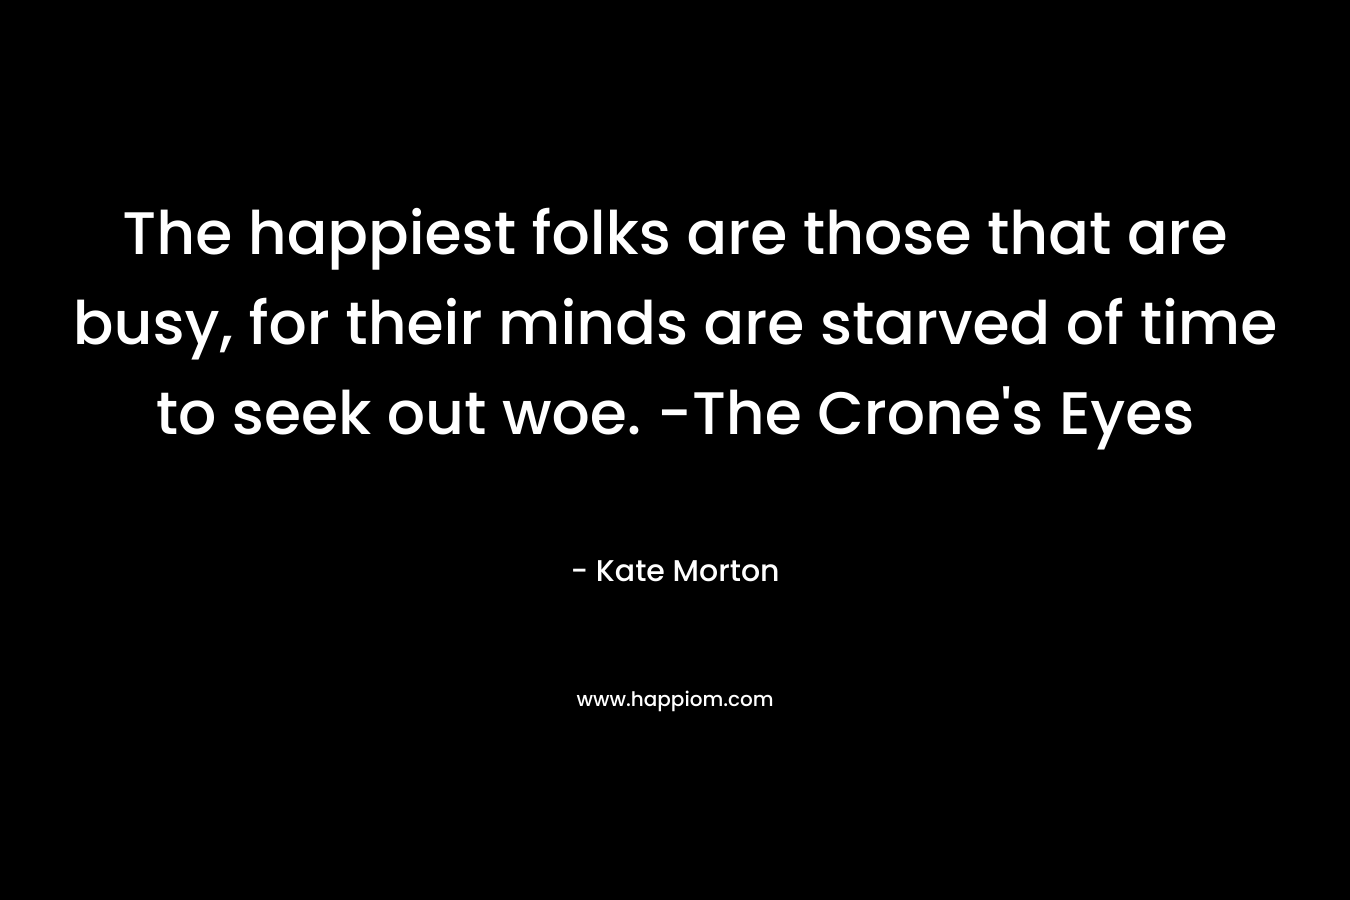 The happiest folks are those that are busy, for their minds are starved of time to seek out woe. -The Crone's Eyes